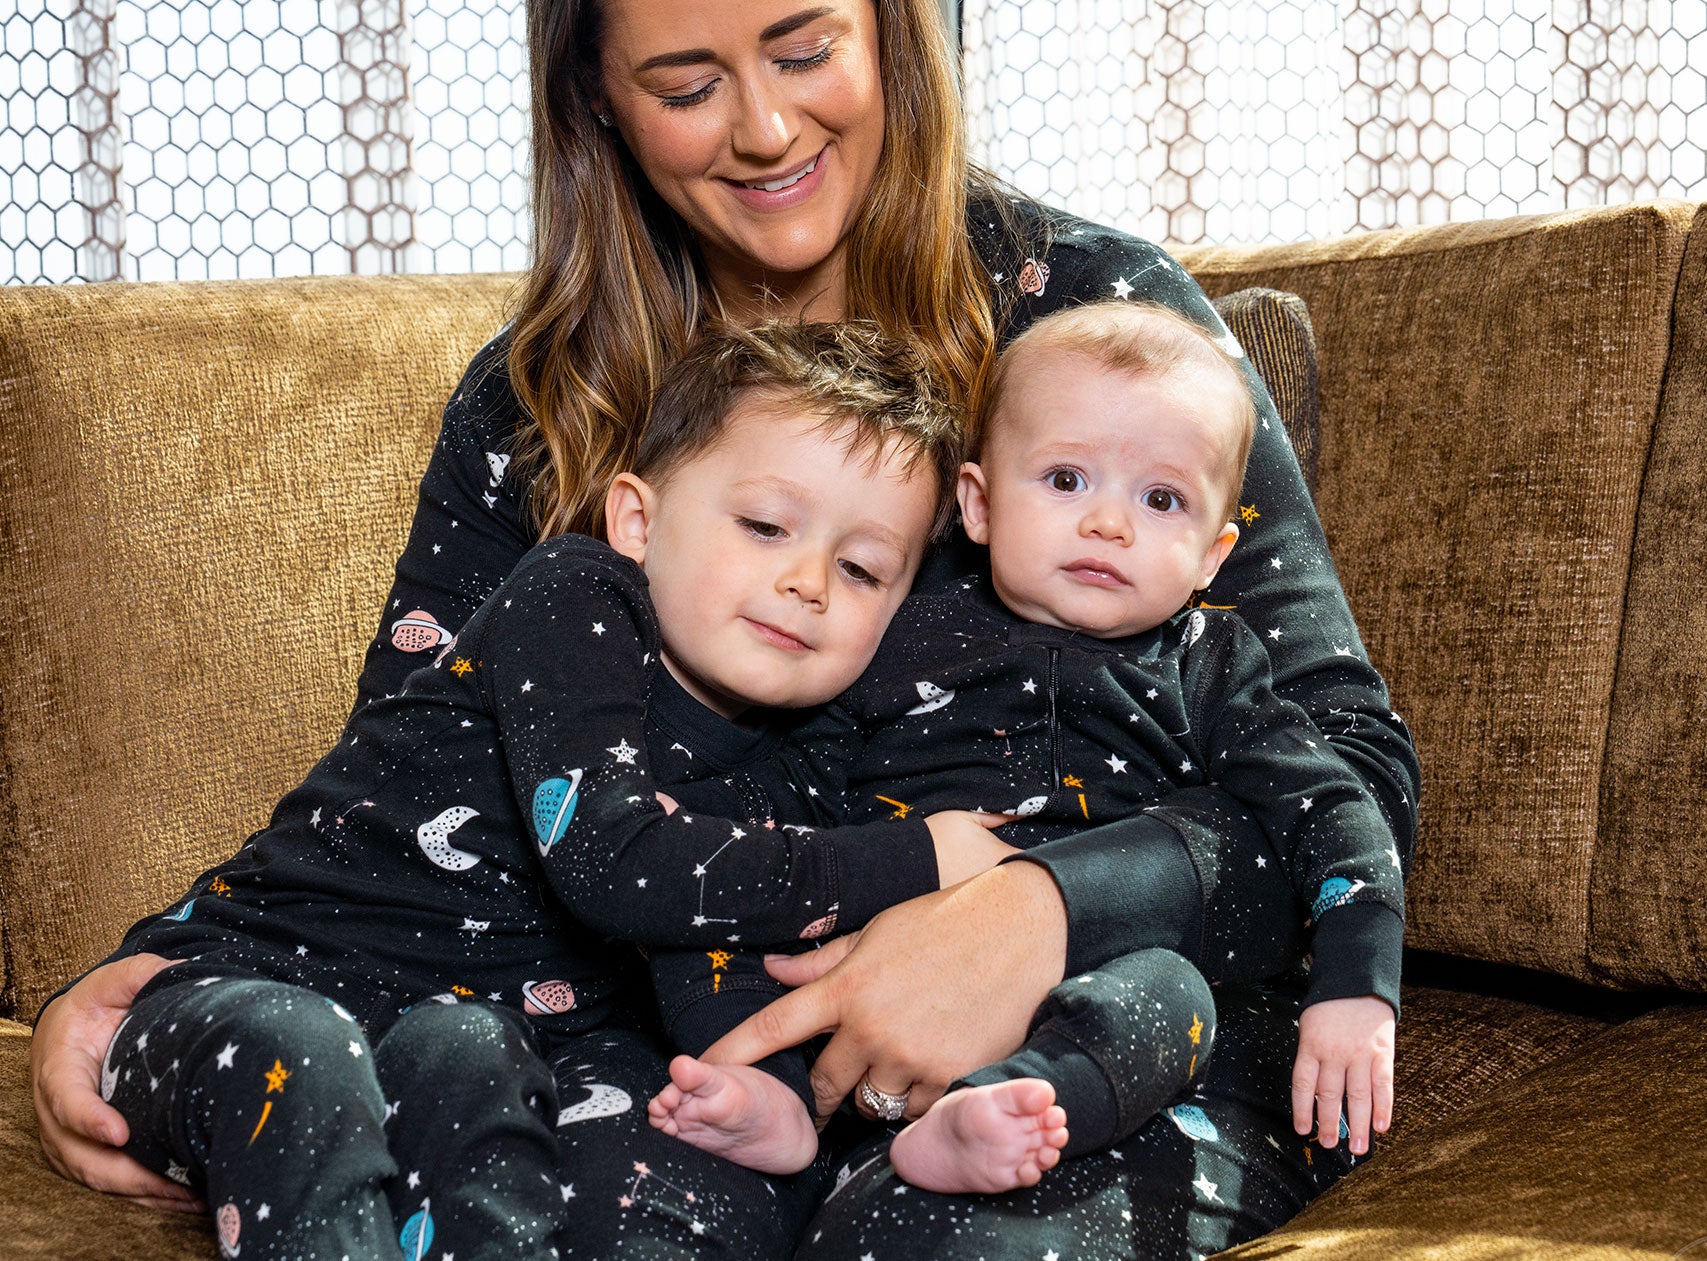 Mom sits on the brown couch with two kids on her lap. All are wearing matching black pajamas with space-inspiring prints. 